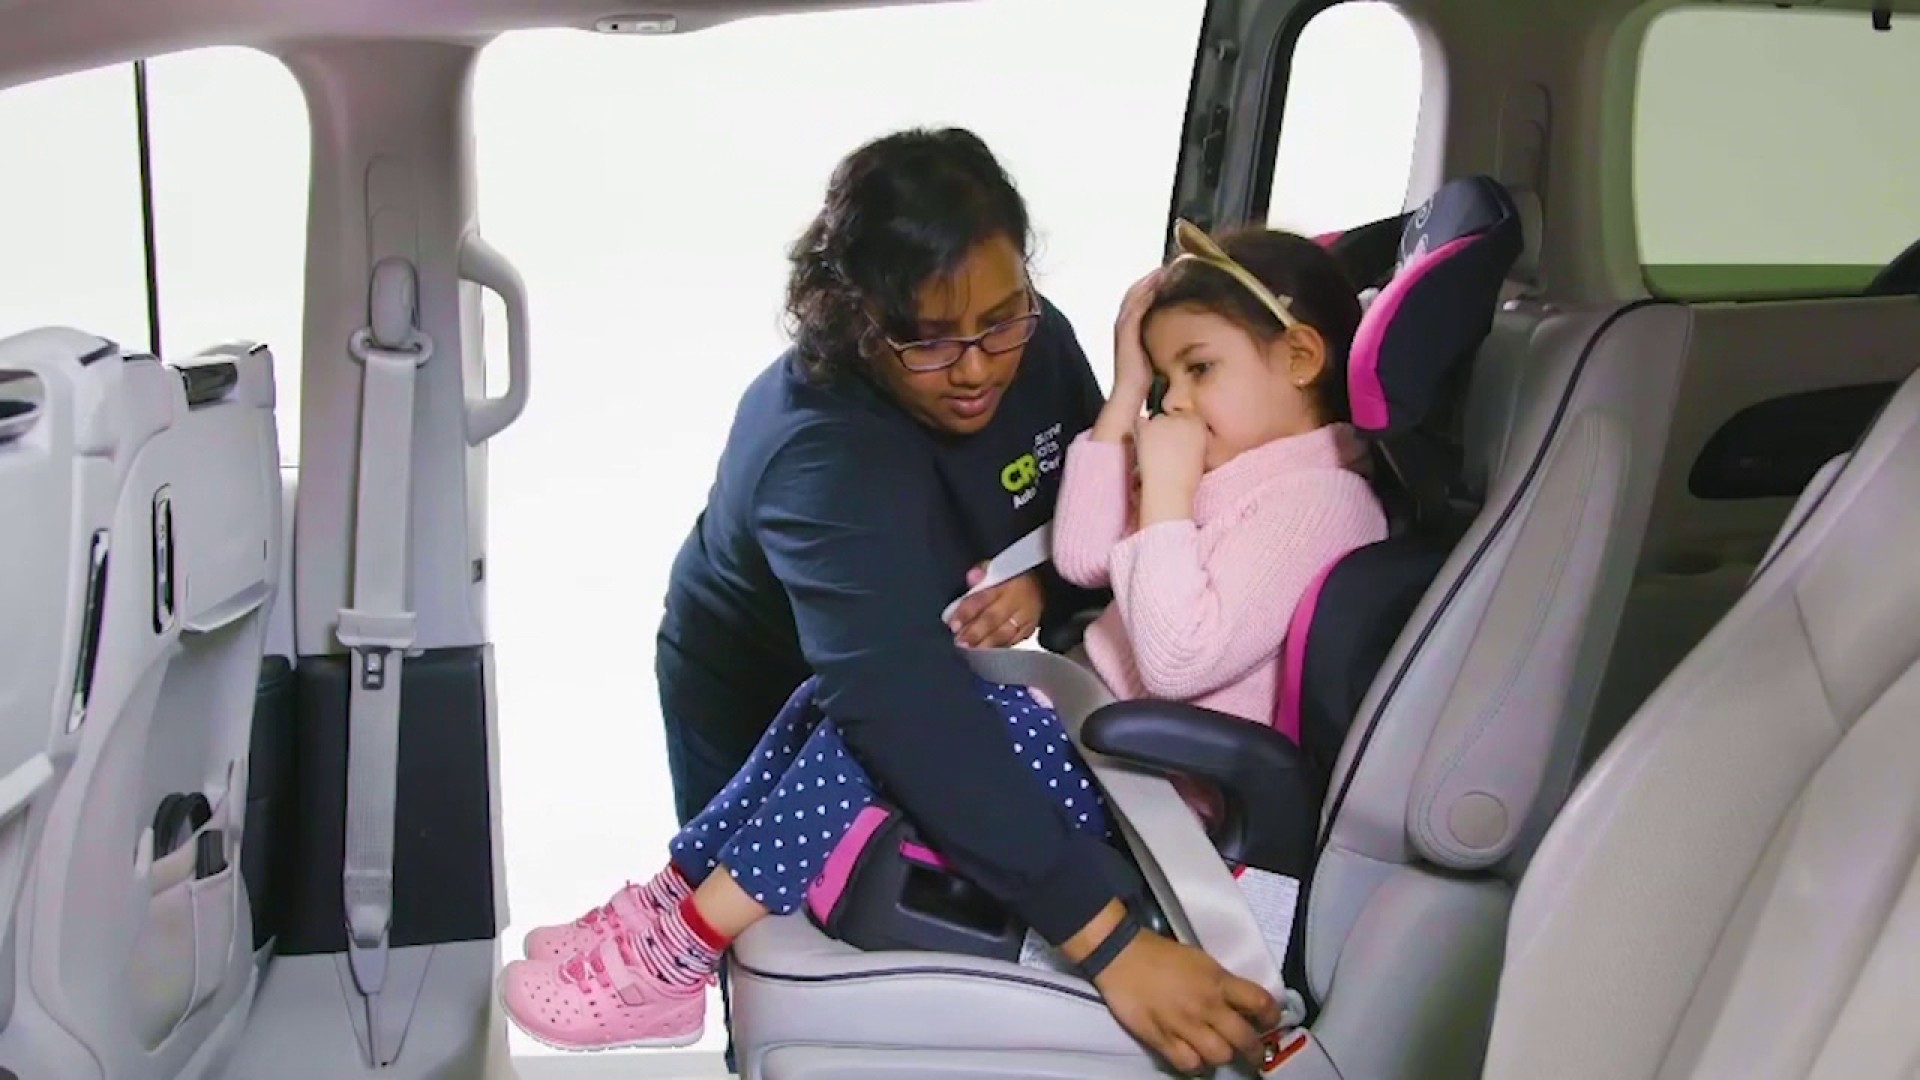 Winter warning: Coats and car seat safety for kids